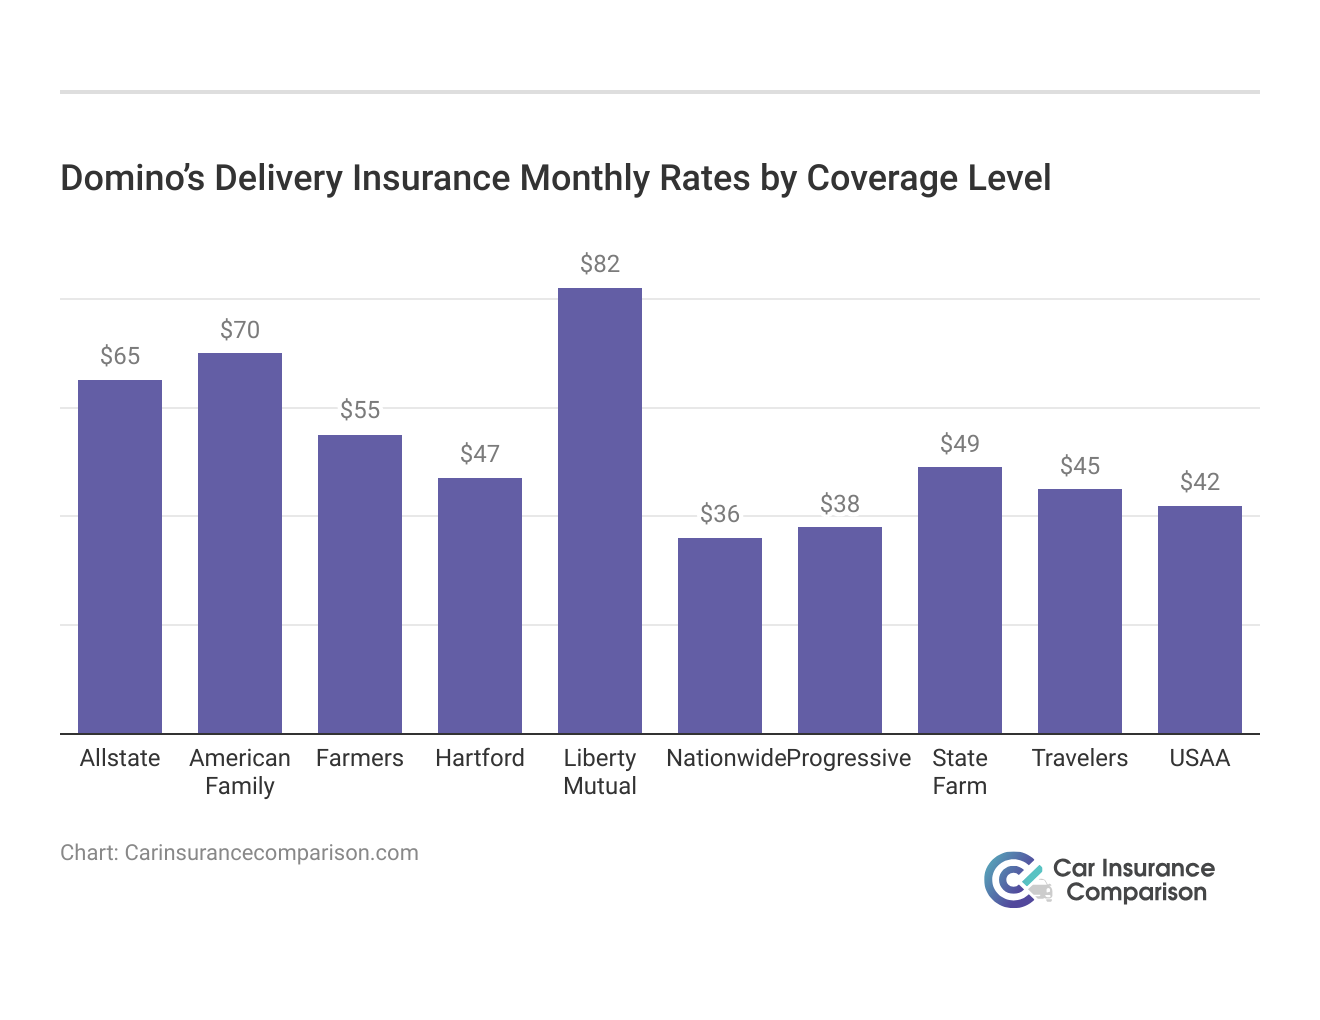 <h3>Domino’s Delivery Insurance Monthly Rates by Coverage Level</h3>